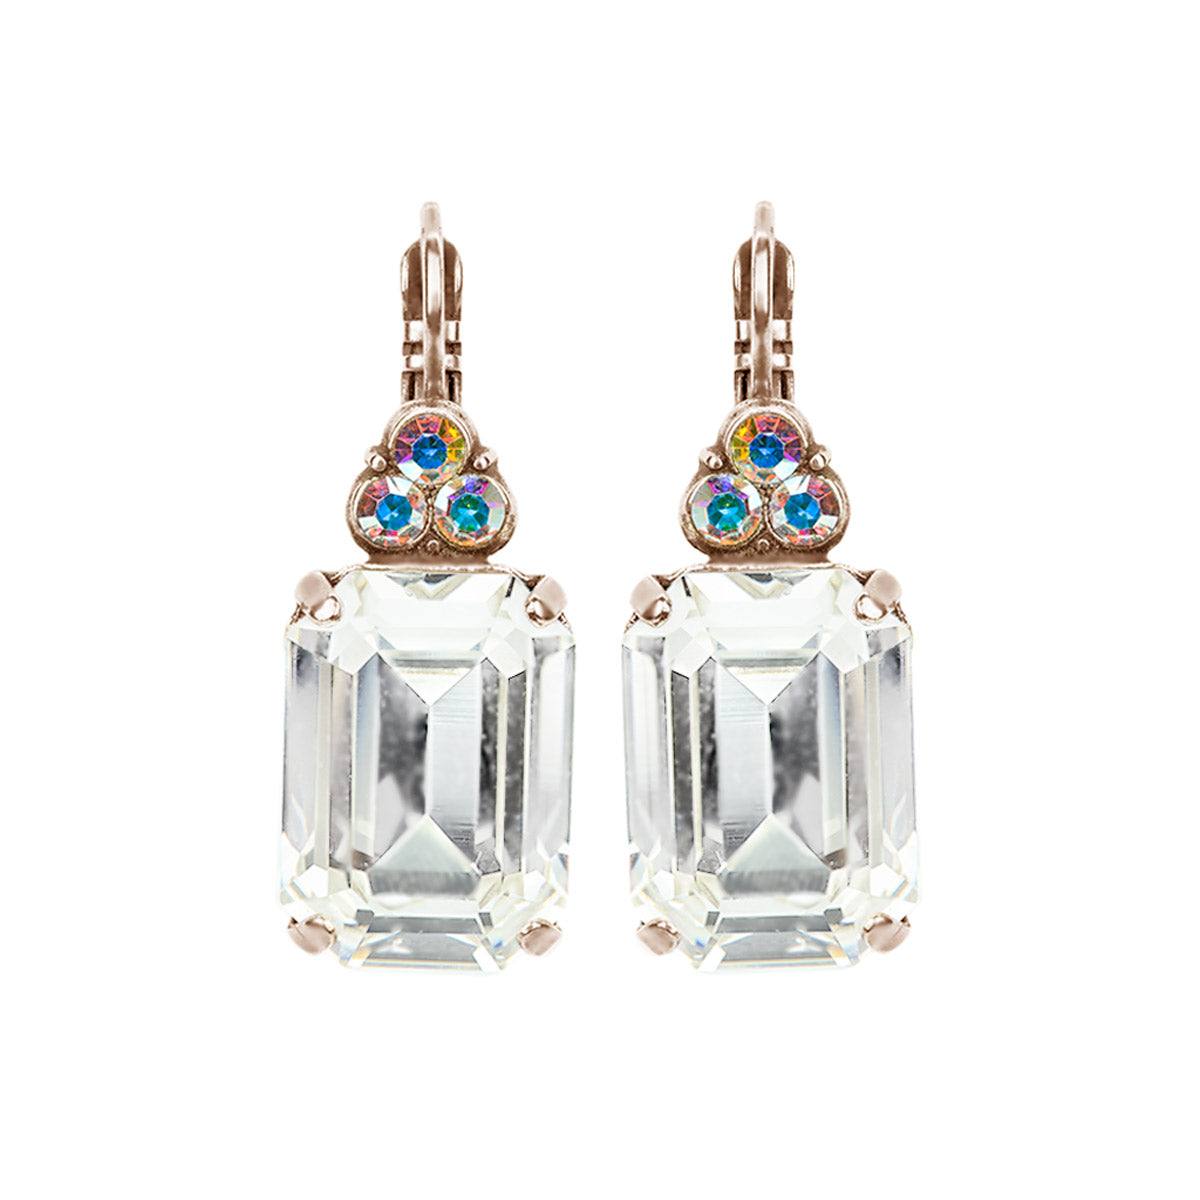 Mariana "On A Clear Day" Large Emerald Cut Bridal Earrings